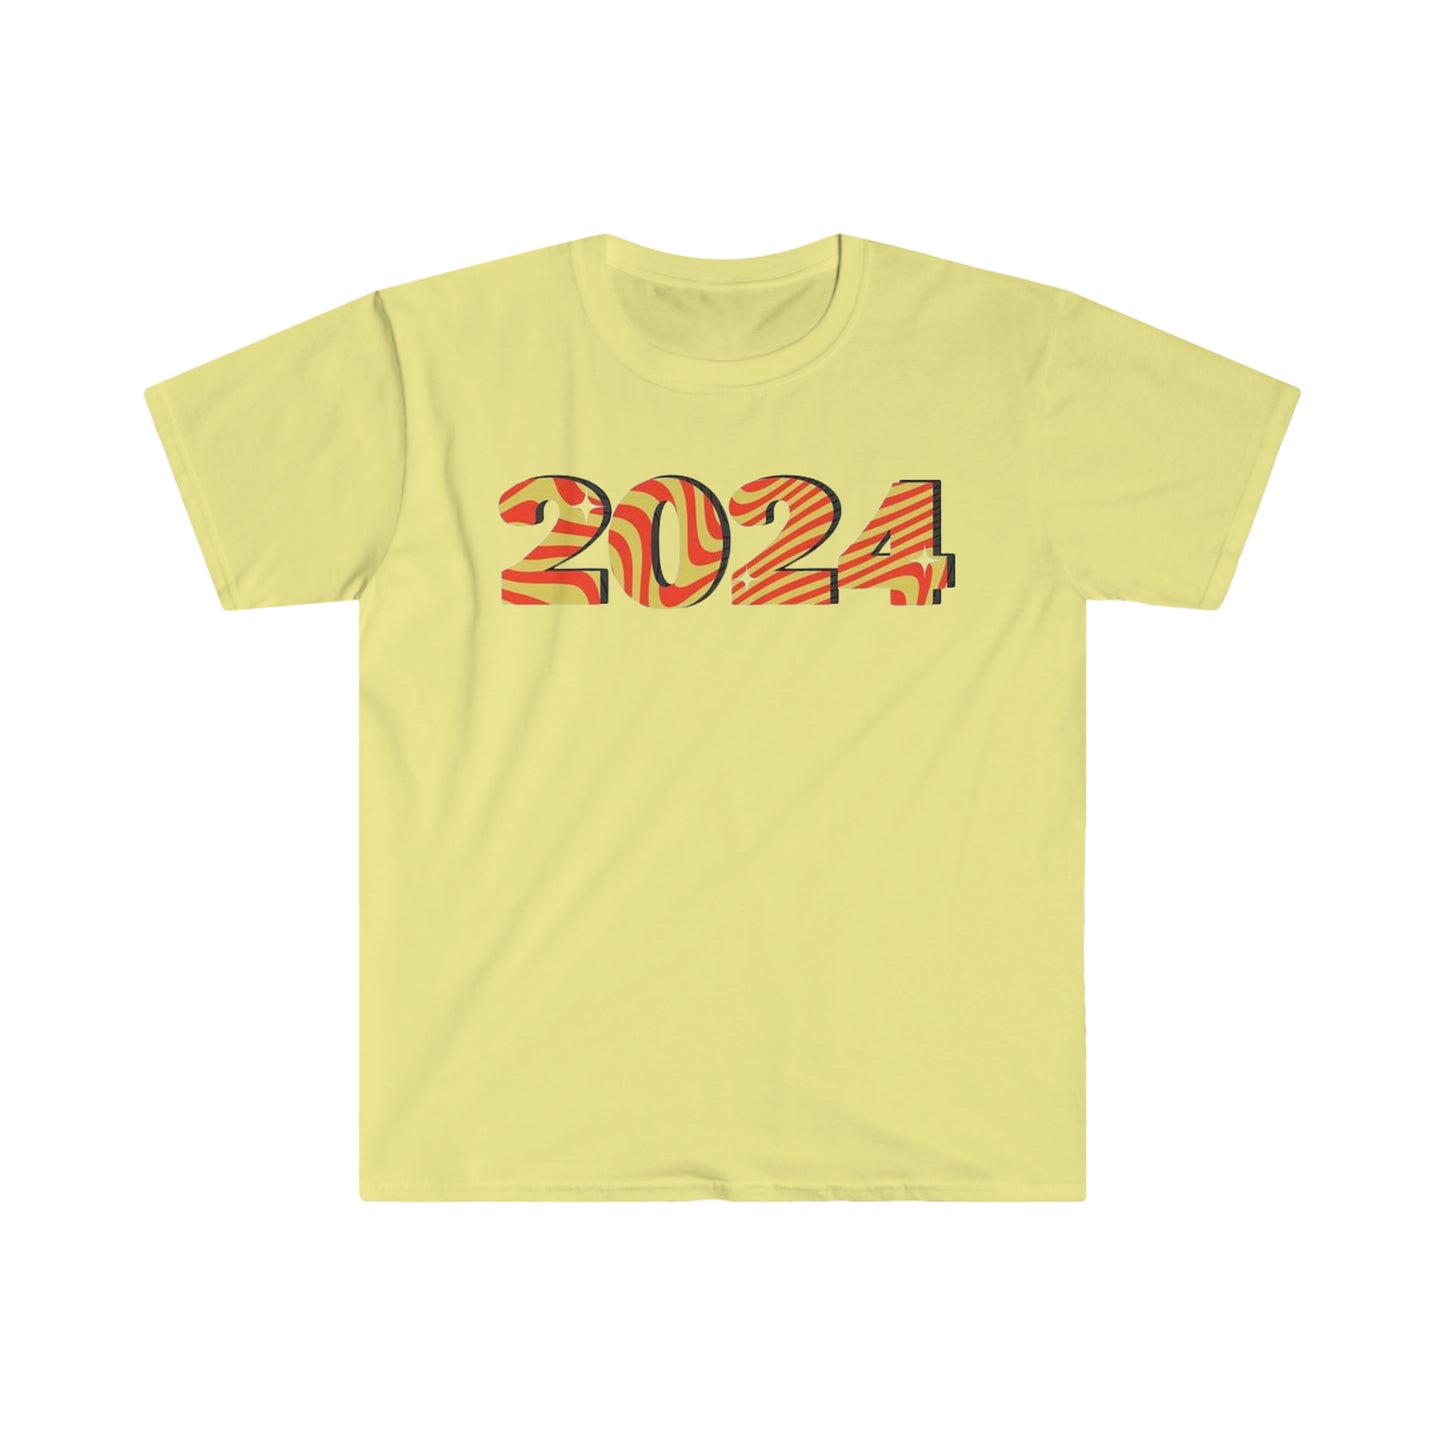 Class of 2024 Period - Unisex Softstyle T-Shirt